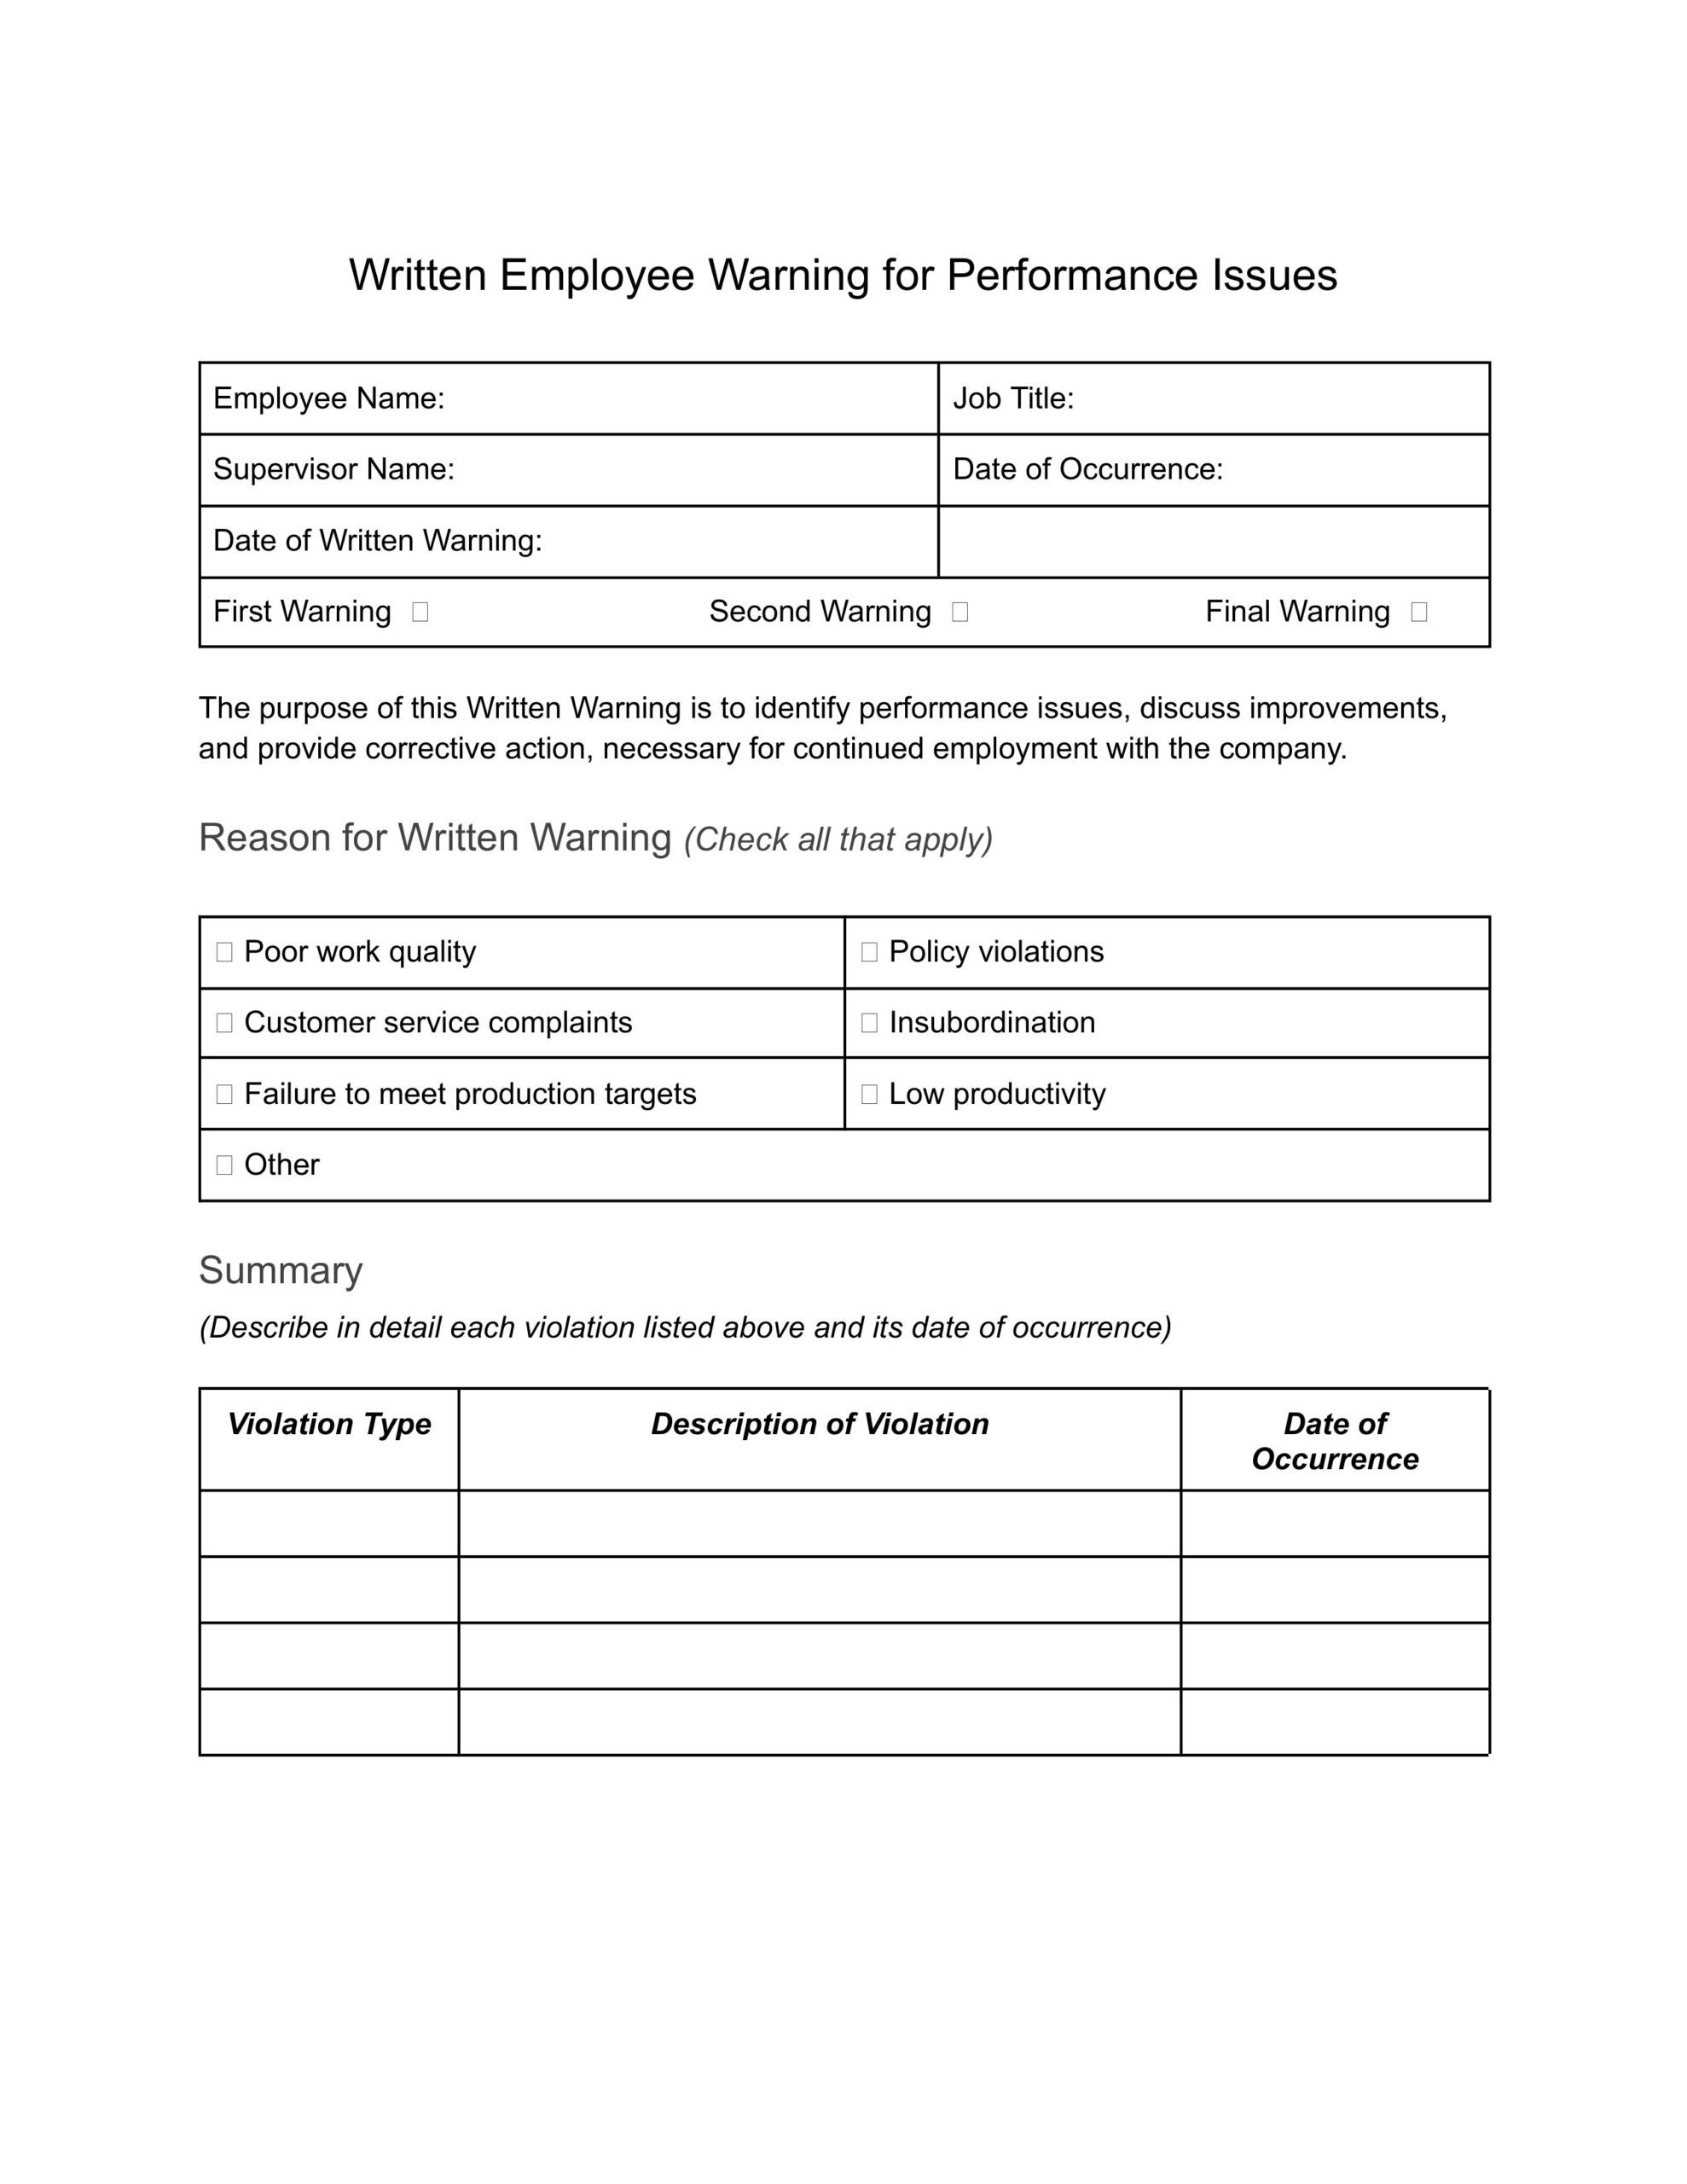 Written Employee Warning for Performance Issues